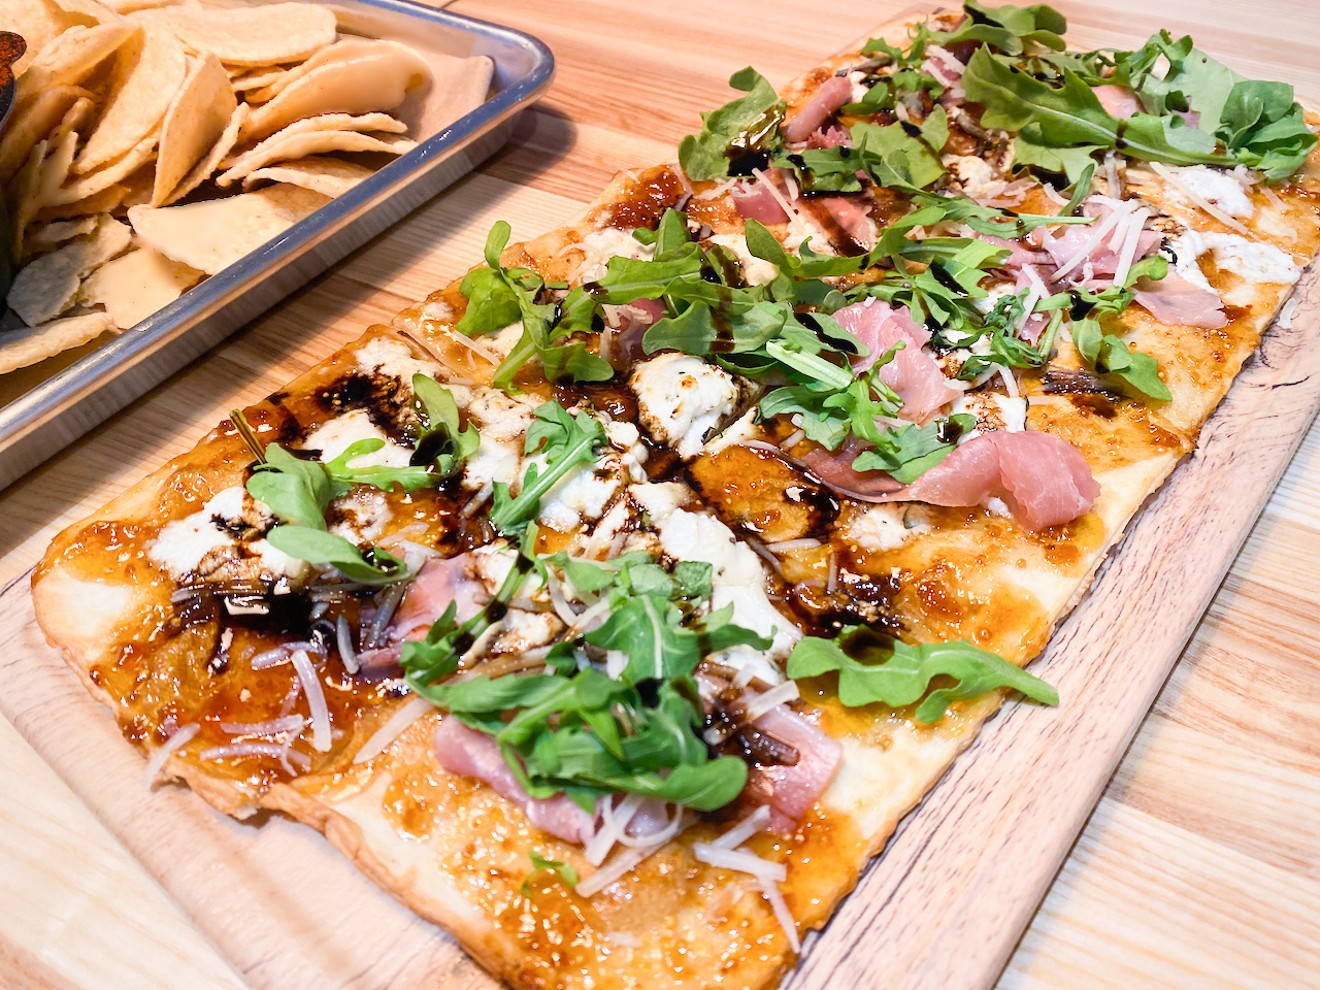 There are four different flatbreads on offer, including this one topped with prosciutto, fig preserves, arugula and a Temptress reduction.